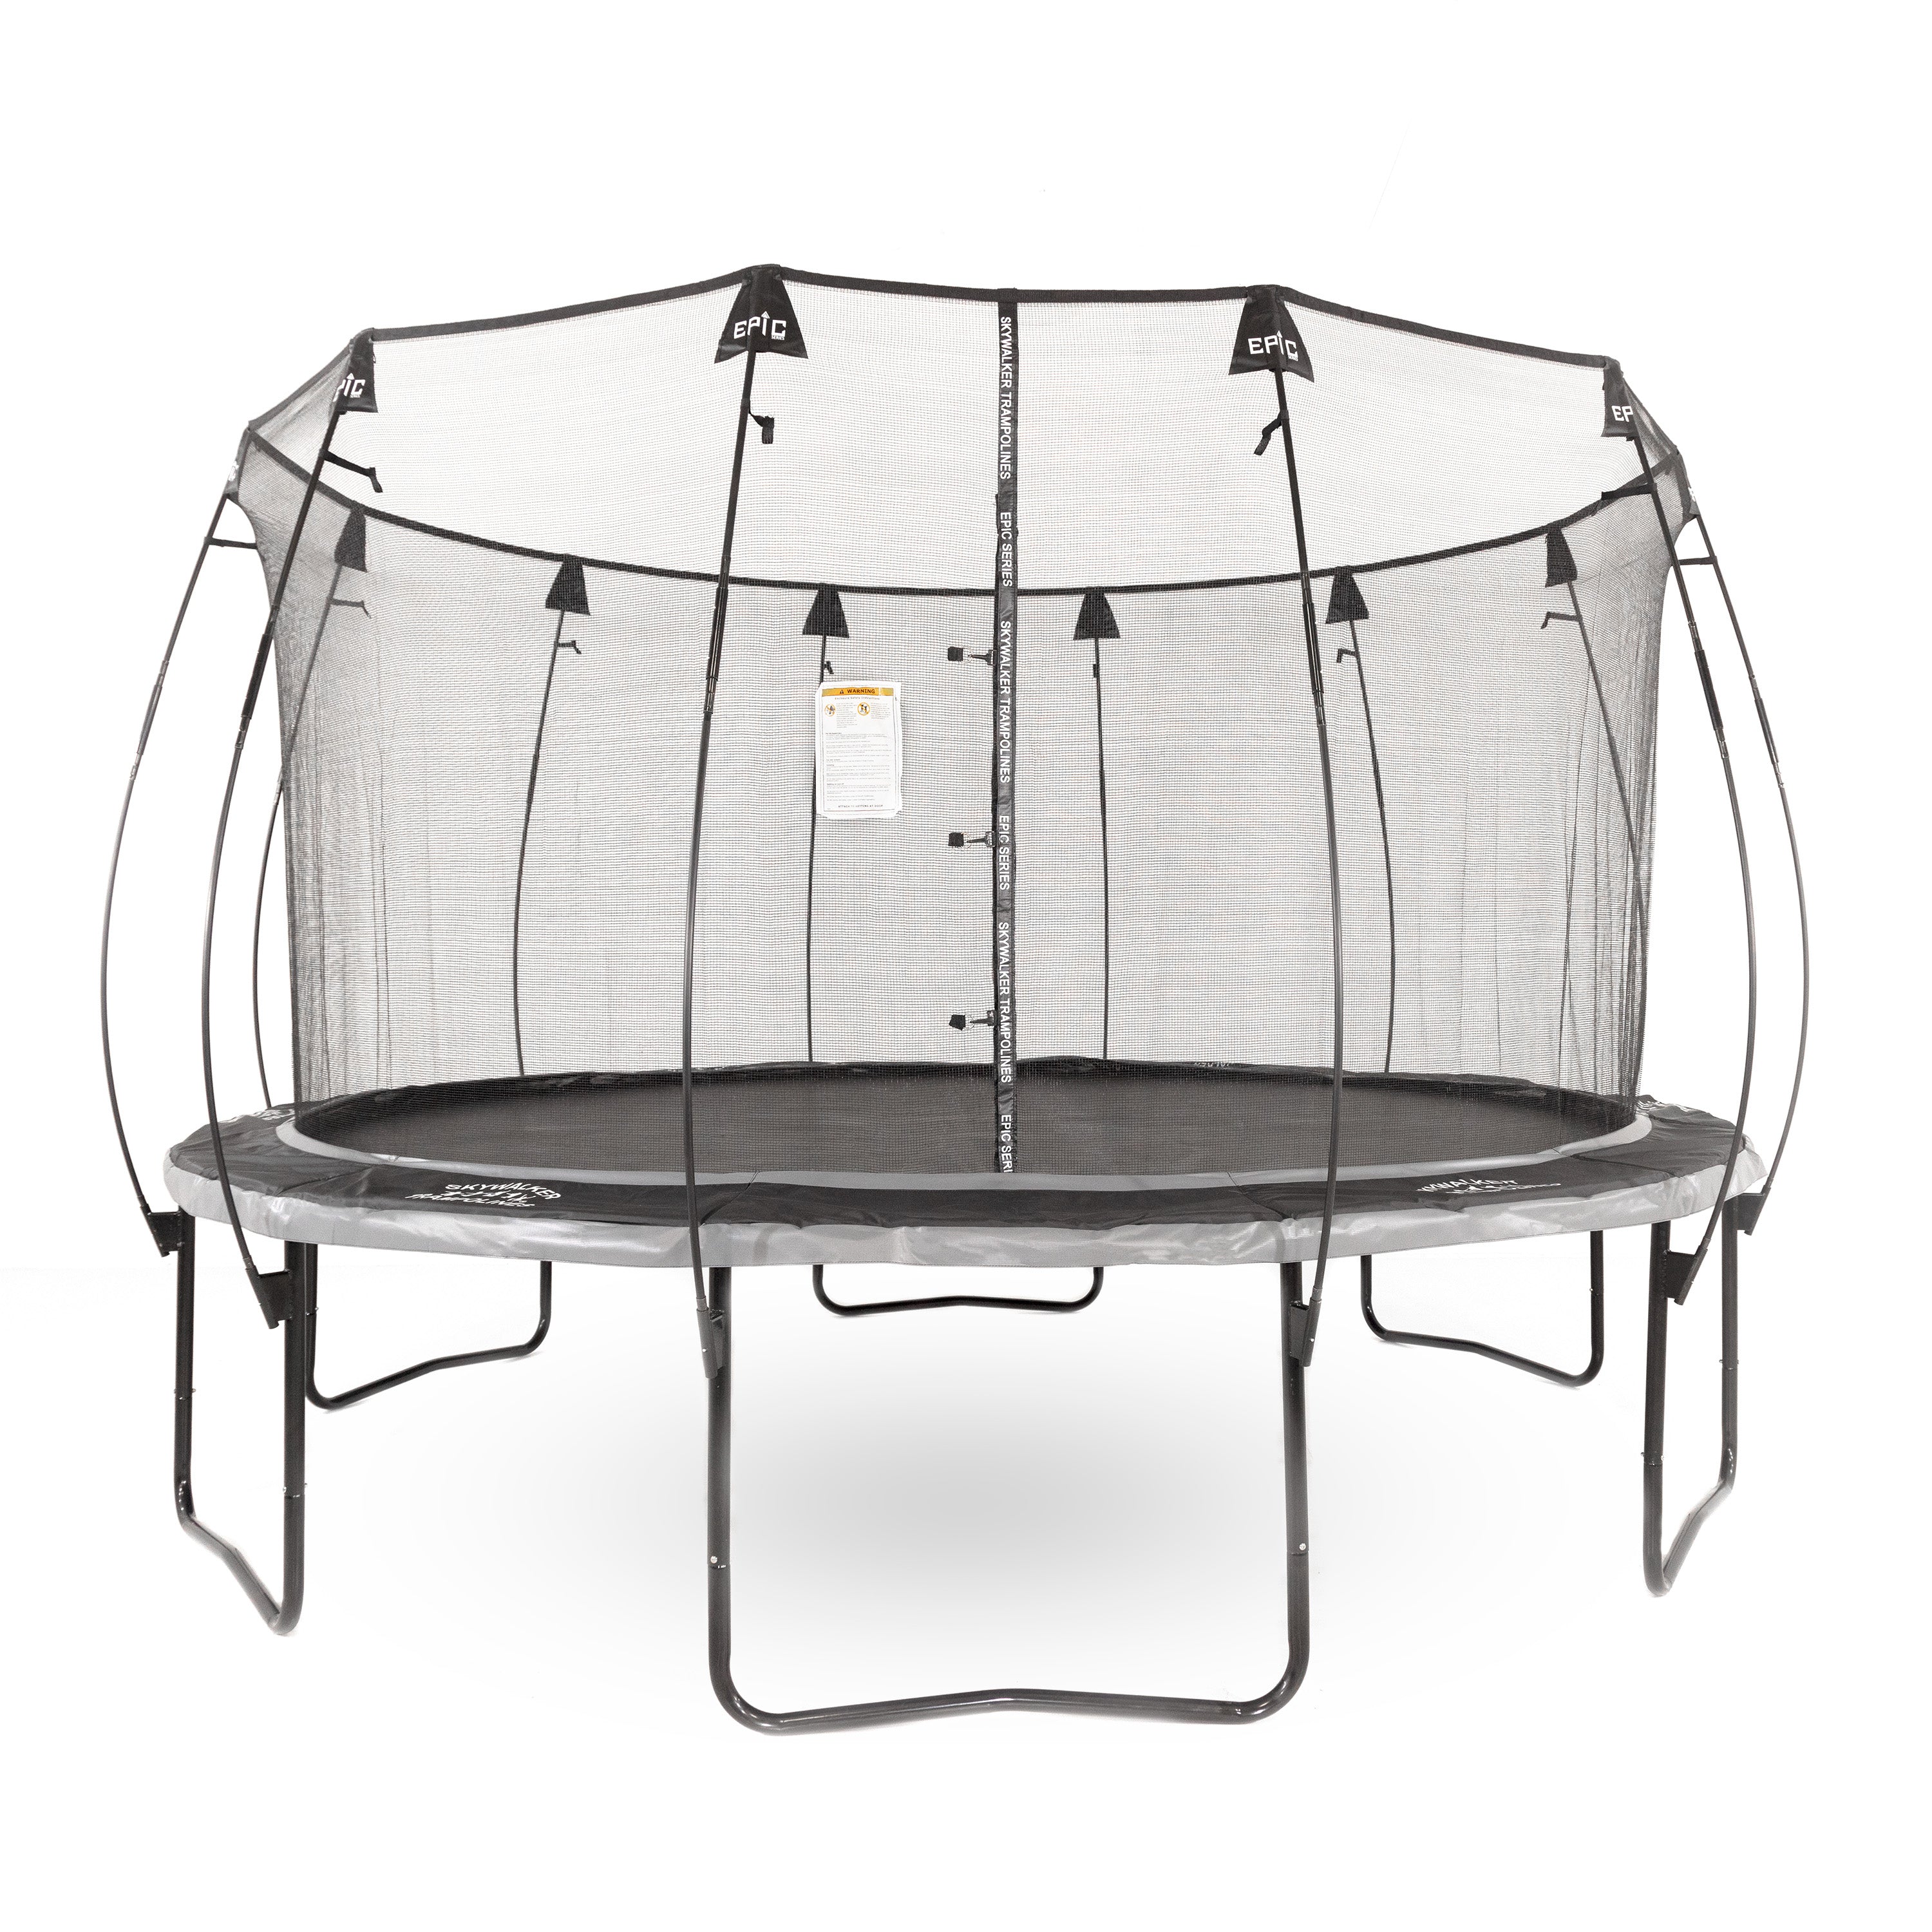 The Epic 14' Round Trampoline has a black and gray color scheme with sleek flex rod enclosure poles. 